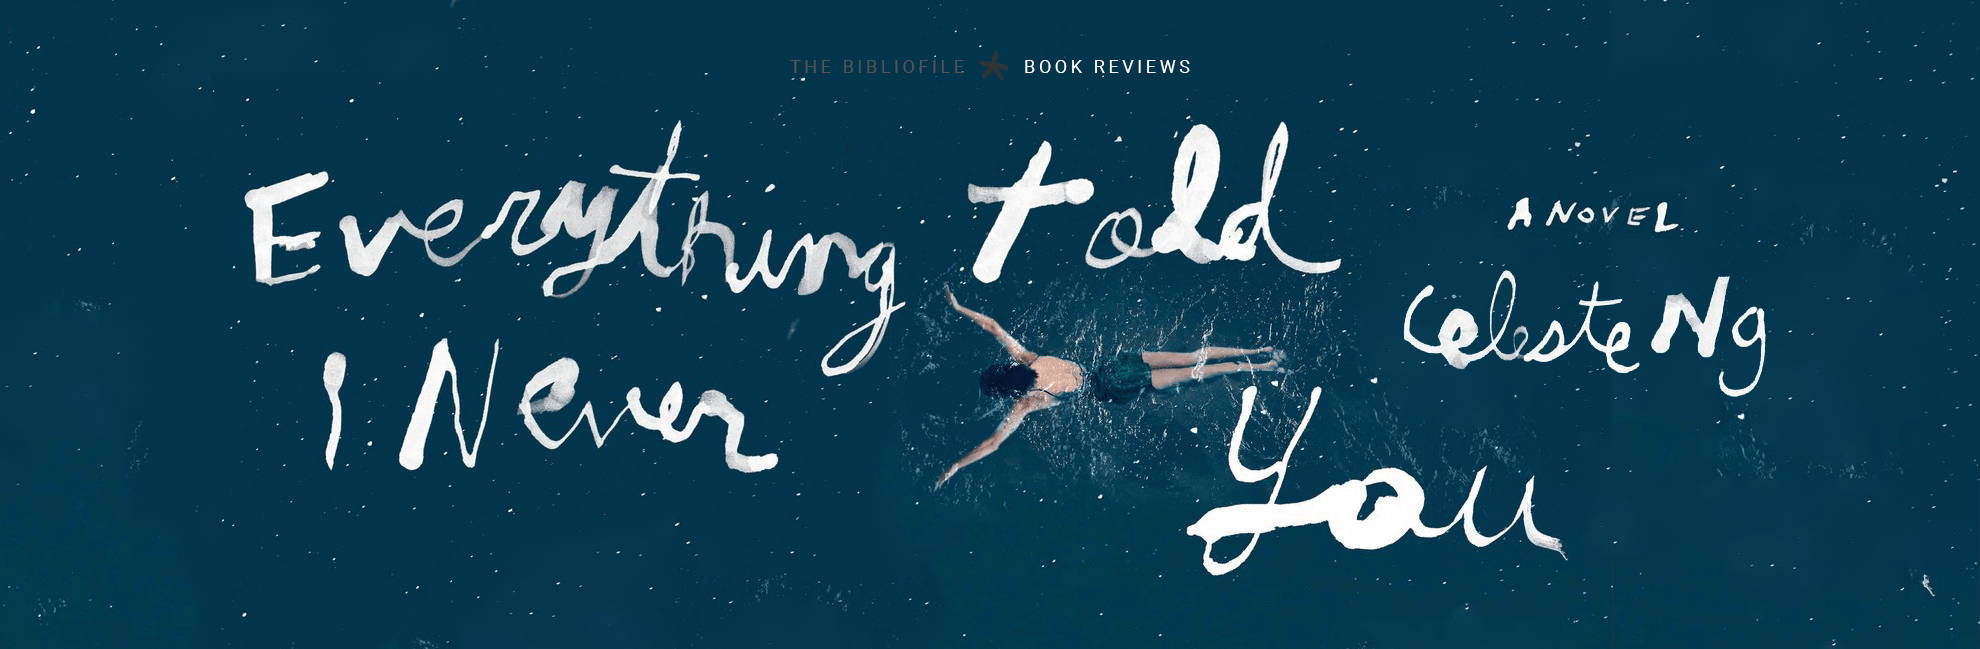 everything I never told you by celeste ng